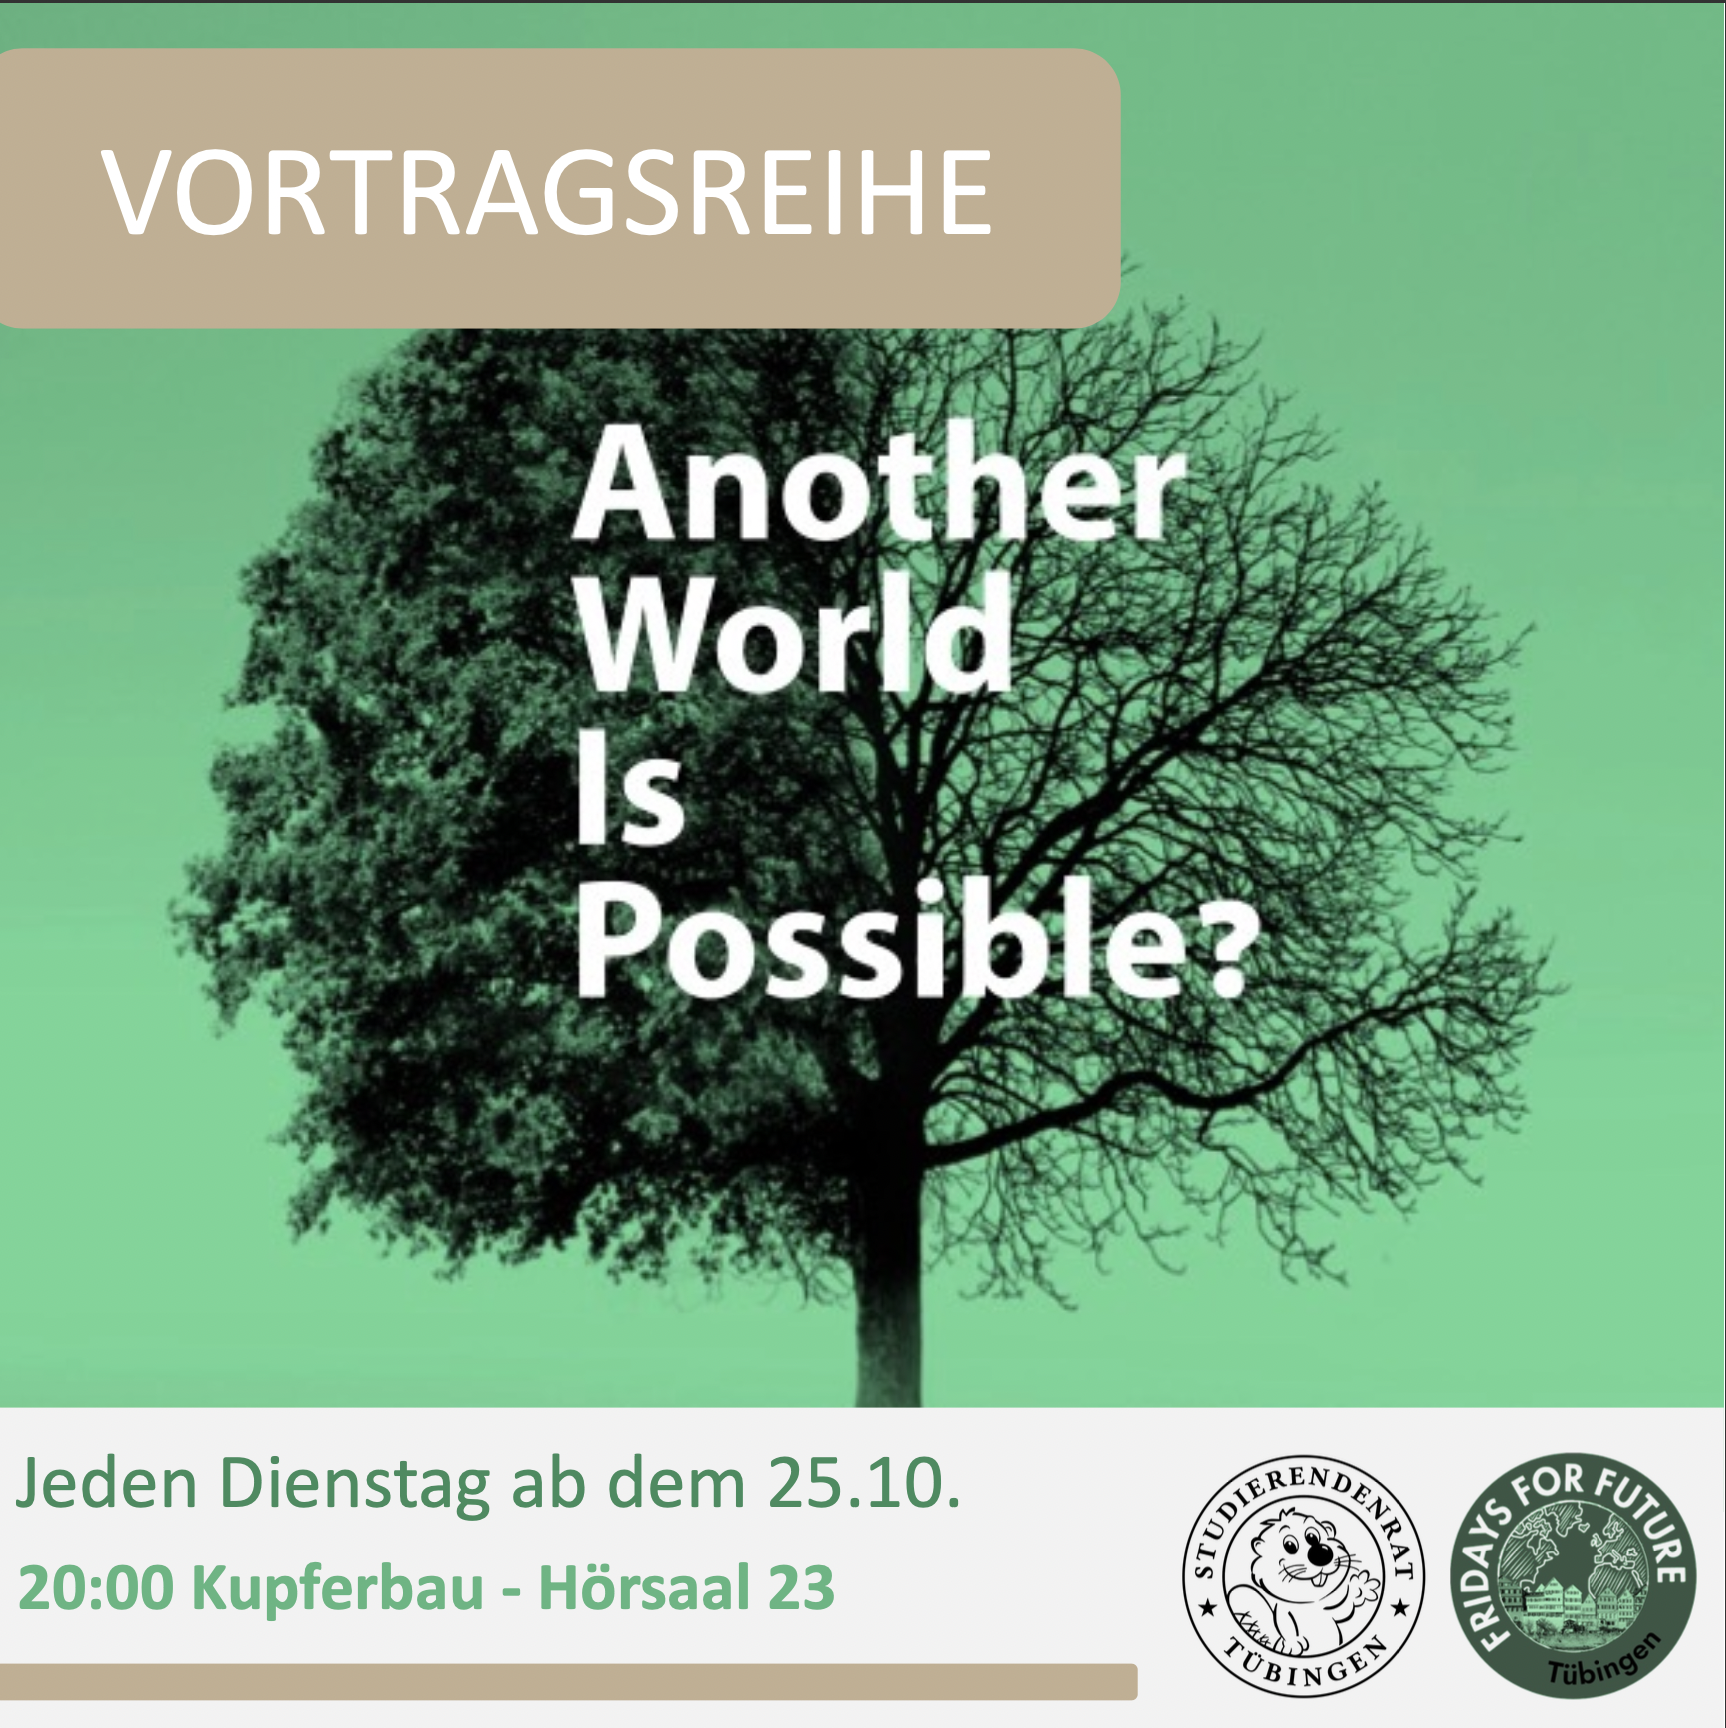 Vortragsreihe – Another world is possible?